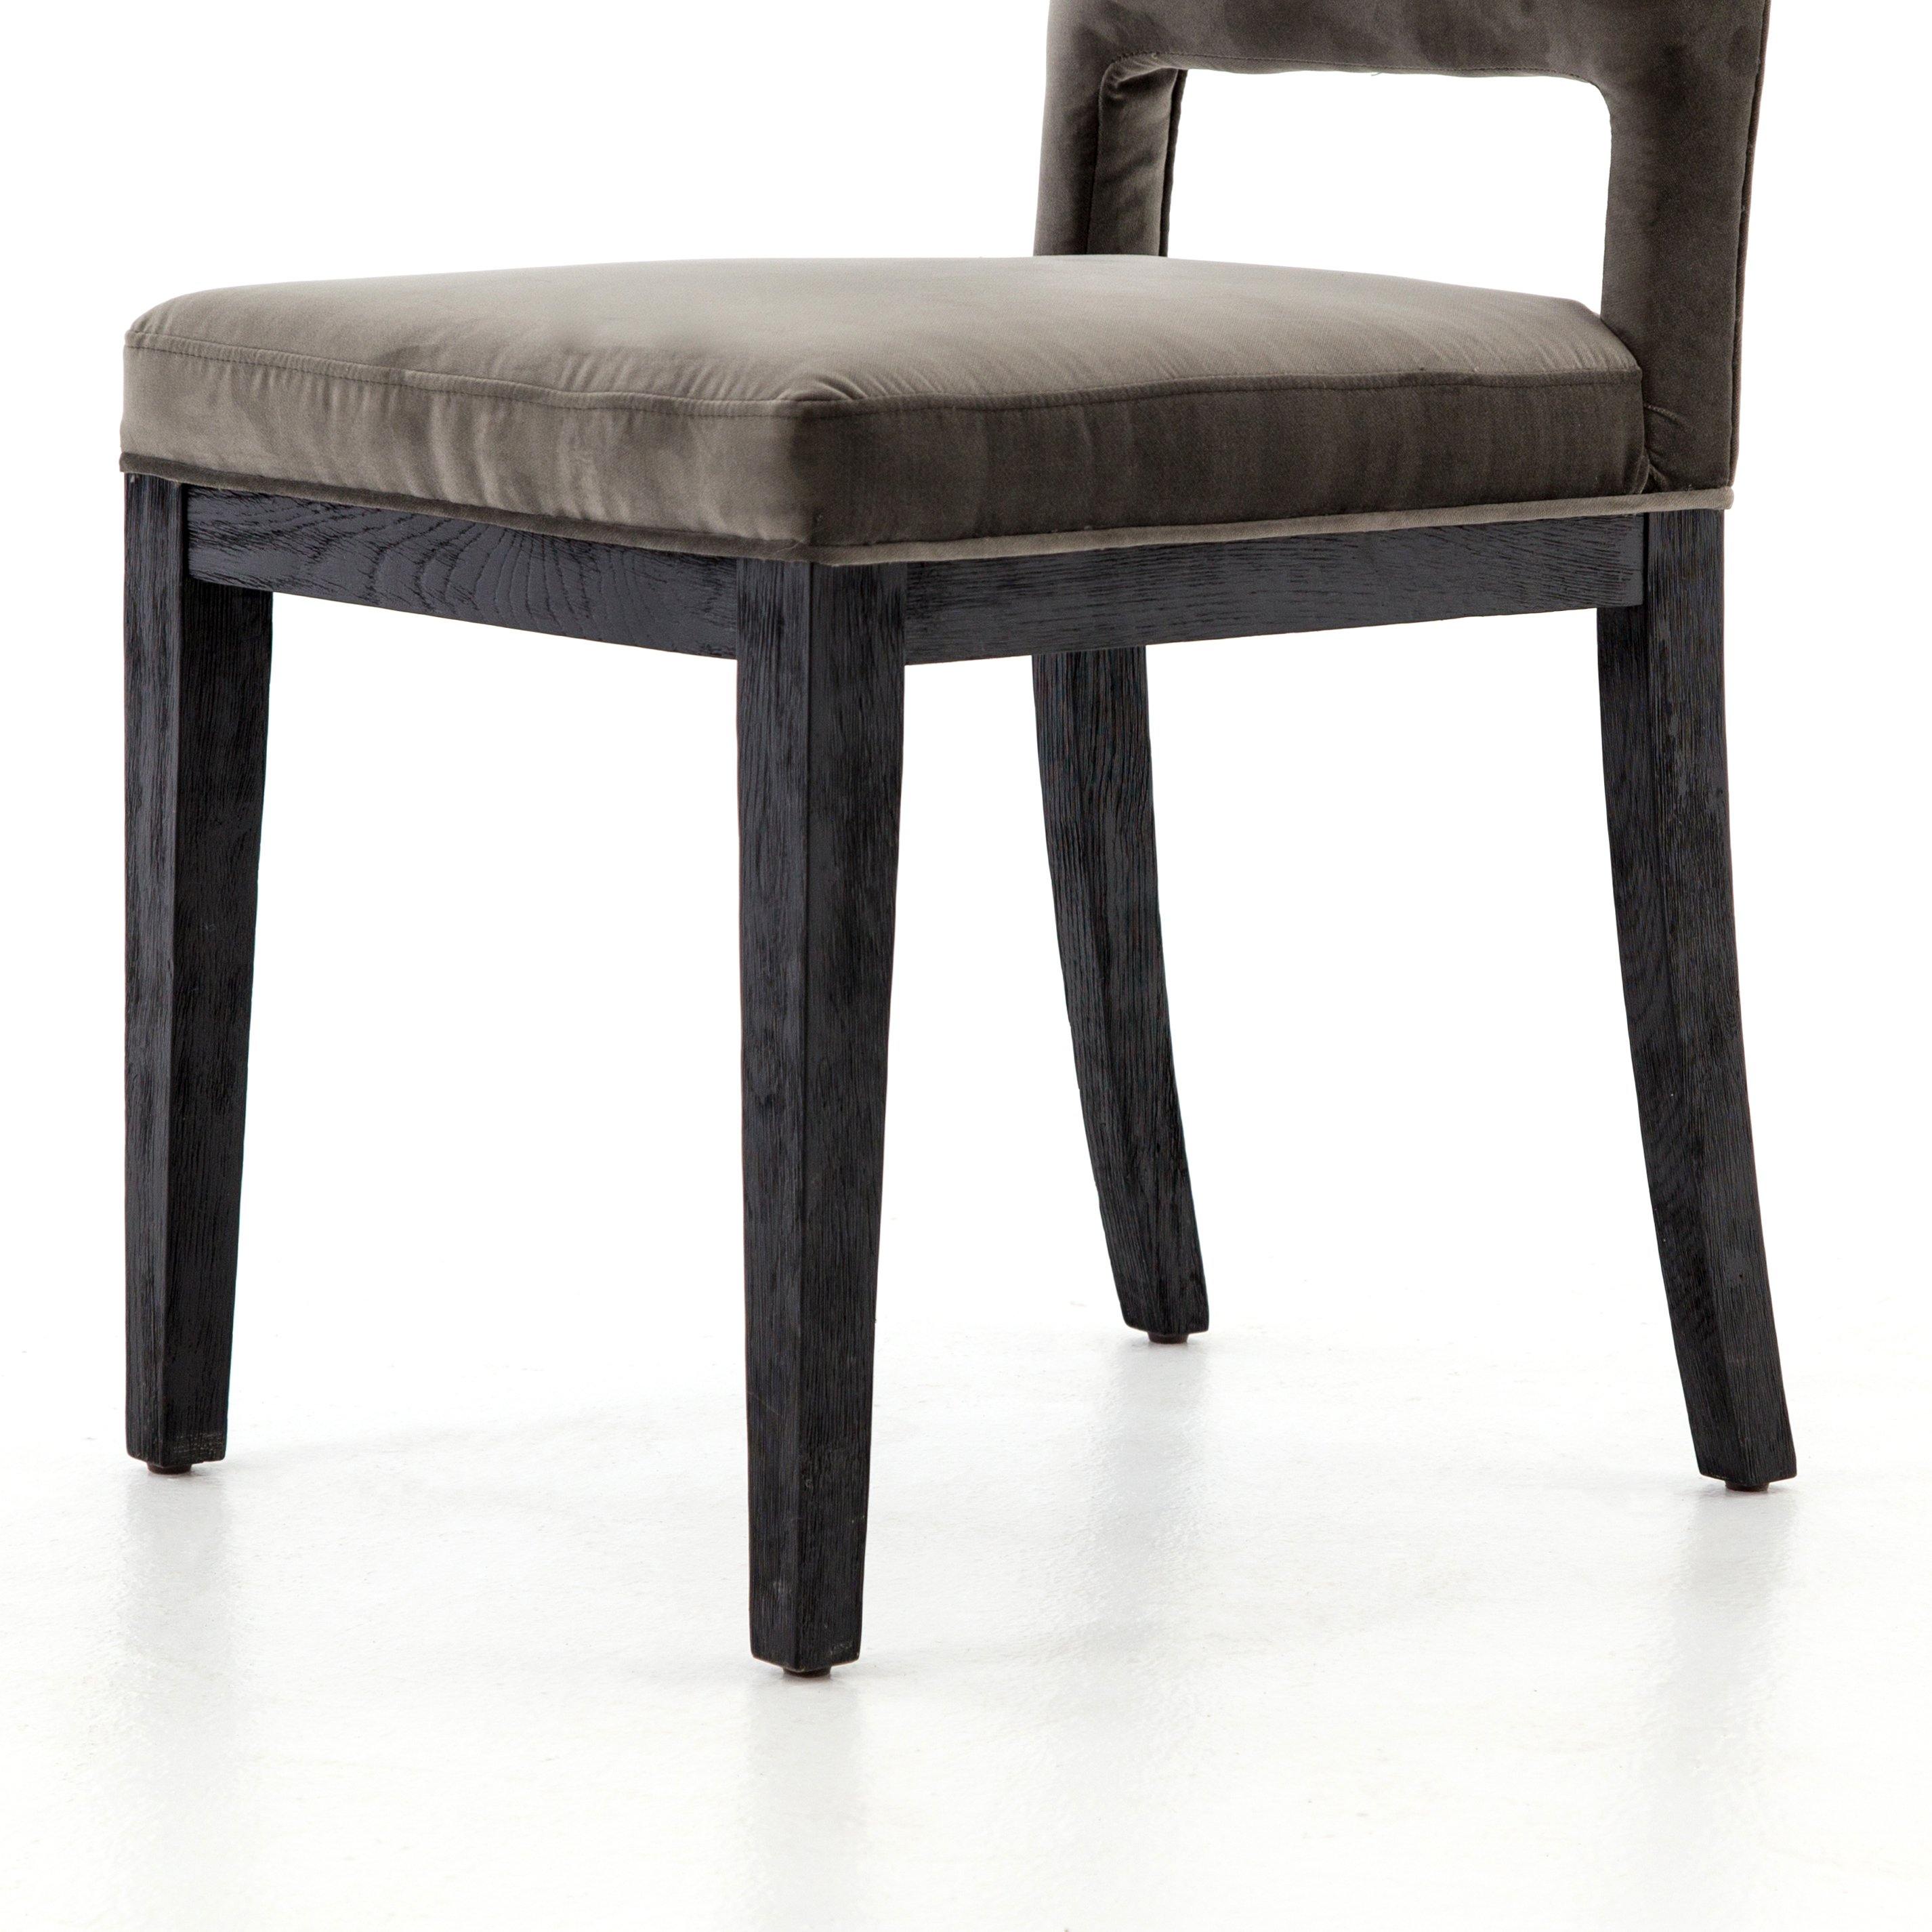 SARA DINING CHAIR - Reimagine Designs - Dining Chair, new